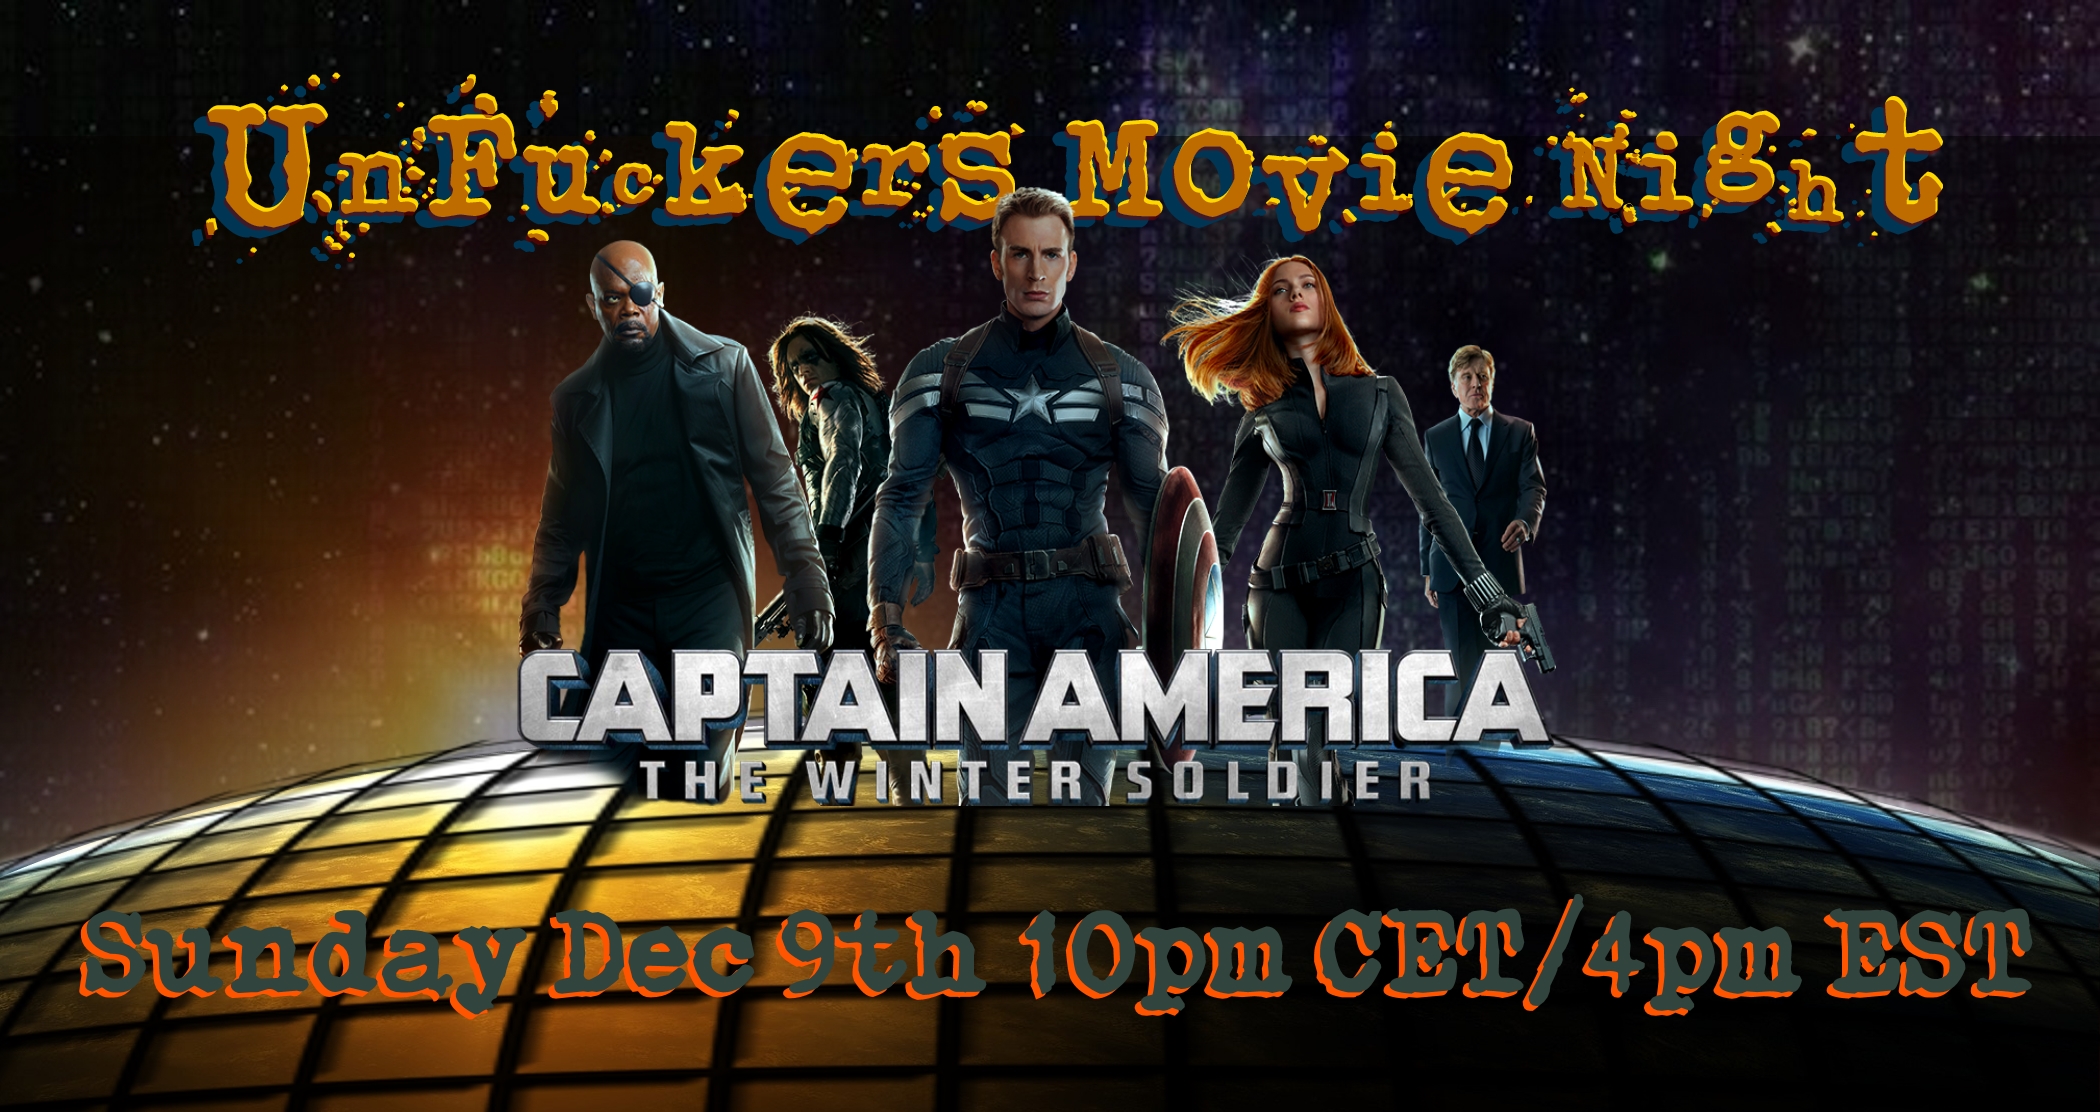 You are currently viewing UnFuckers Movie: Capt America: the Winter Soldier